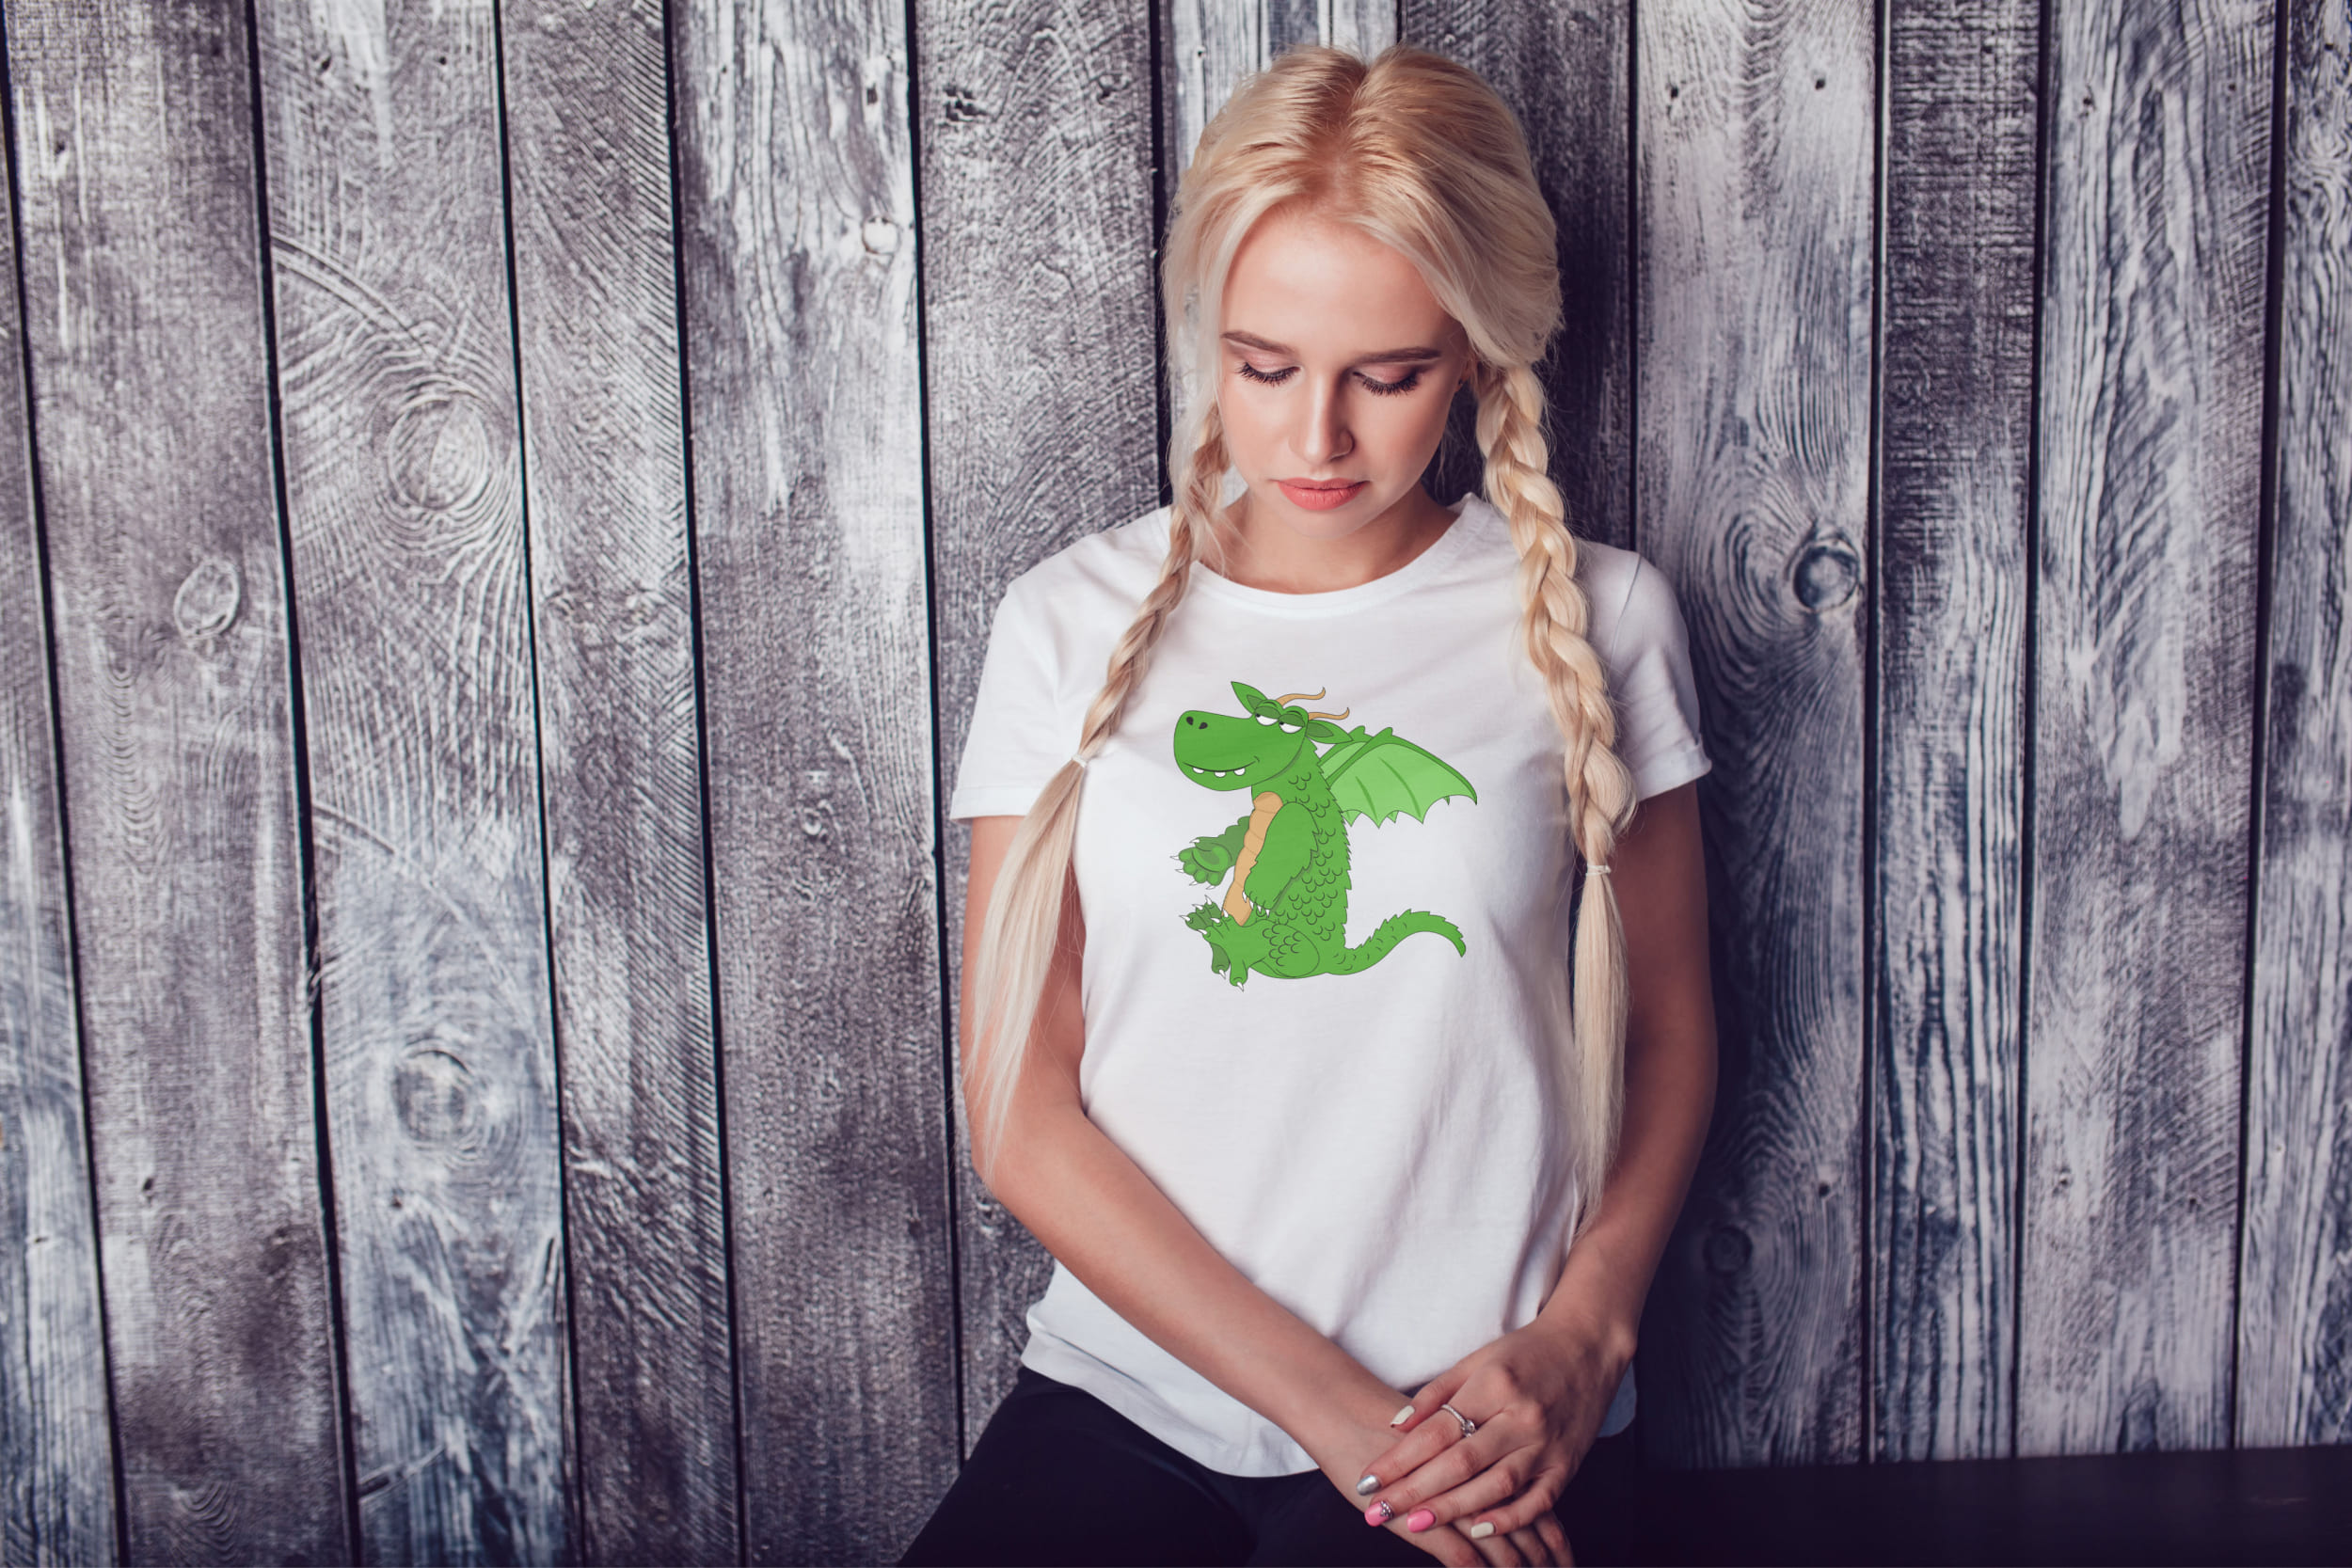 A girl with blond hair and a white T-shirt with a light green and yellow dragon.